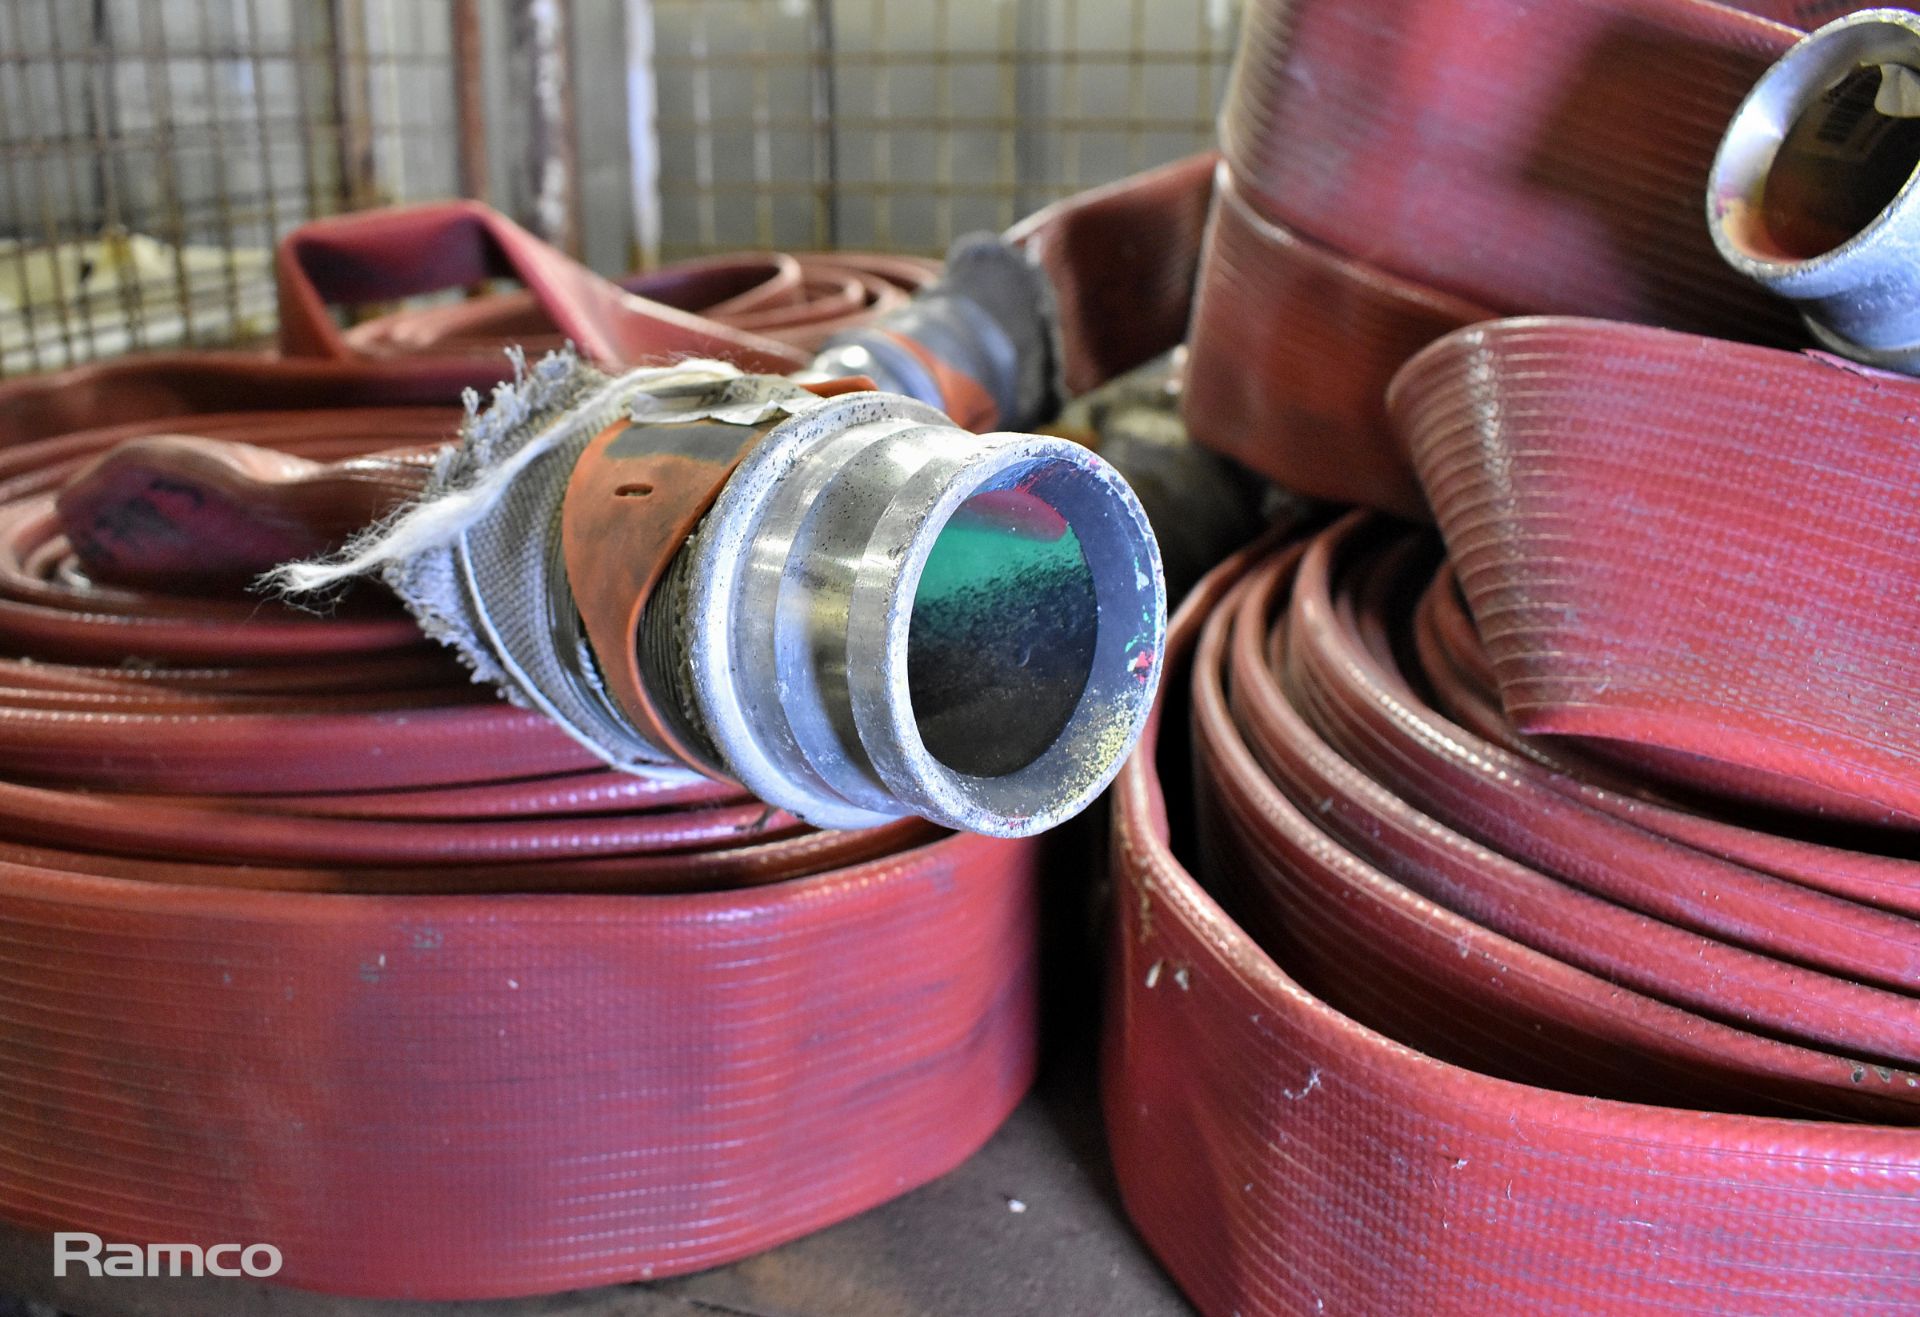 5x Angus Duraline BS 6391 2009 Type 3 31015 Layflat Fire Hoses - approx. 22.5m long, 70mm diameter - Image 2 of 3